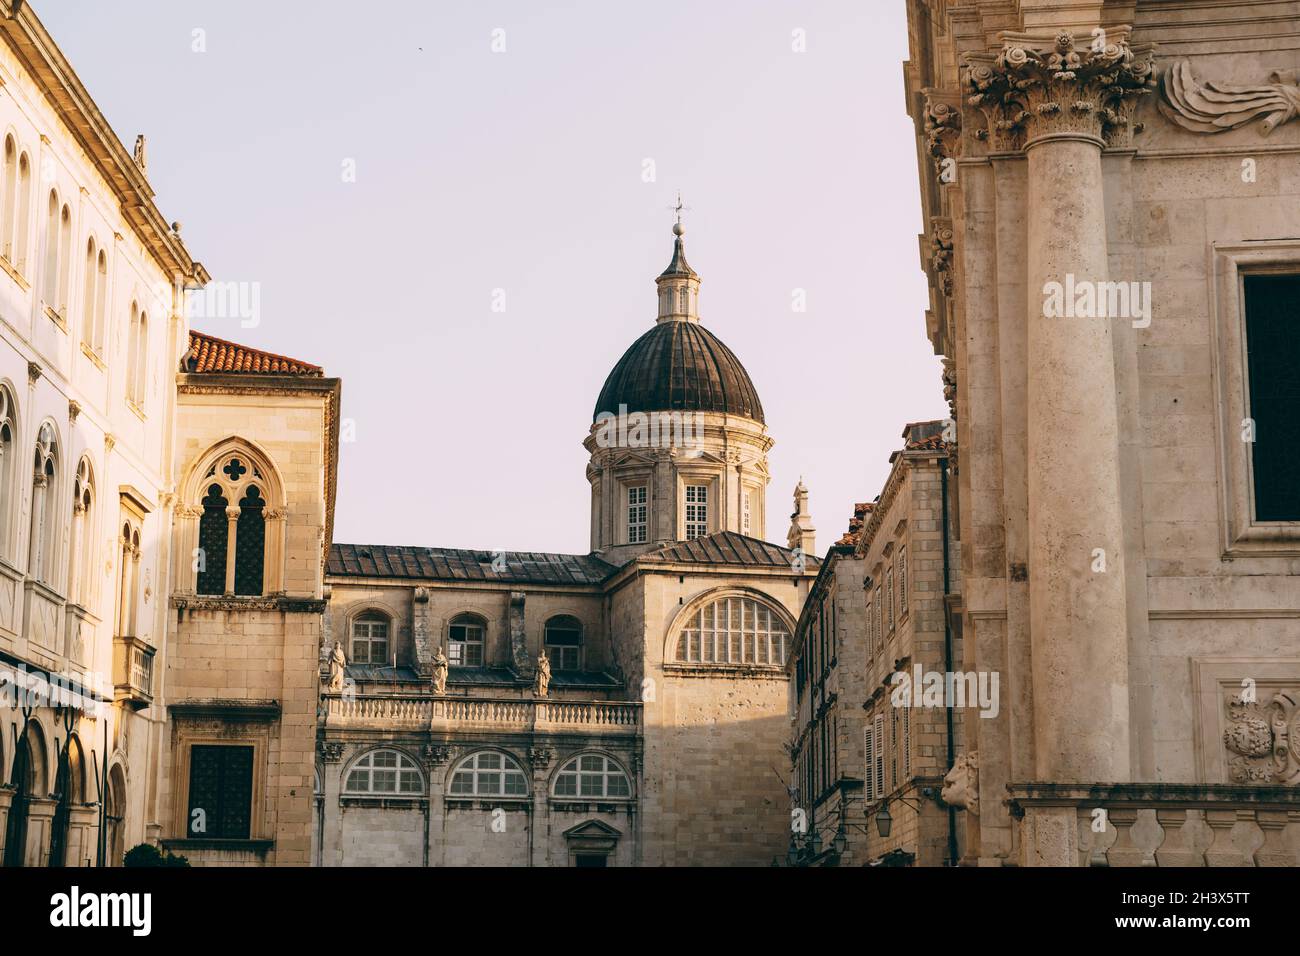 Cathedral of the Assumption of the Virgin Mary in the old city of Dubrovnik Dubrovnik. Church with a large dome. Stock Photo